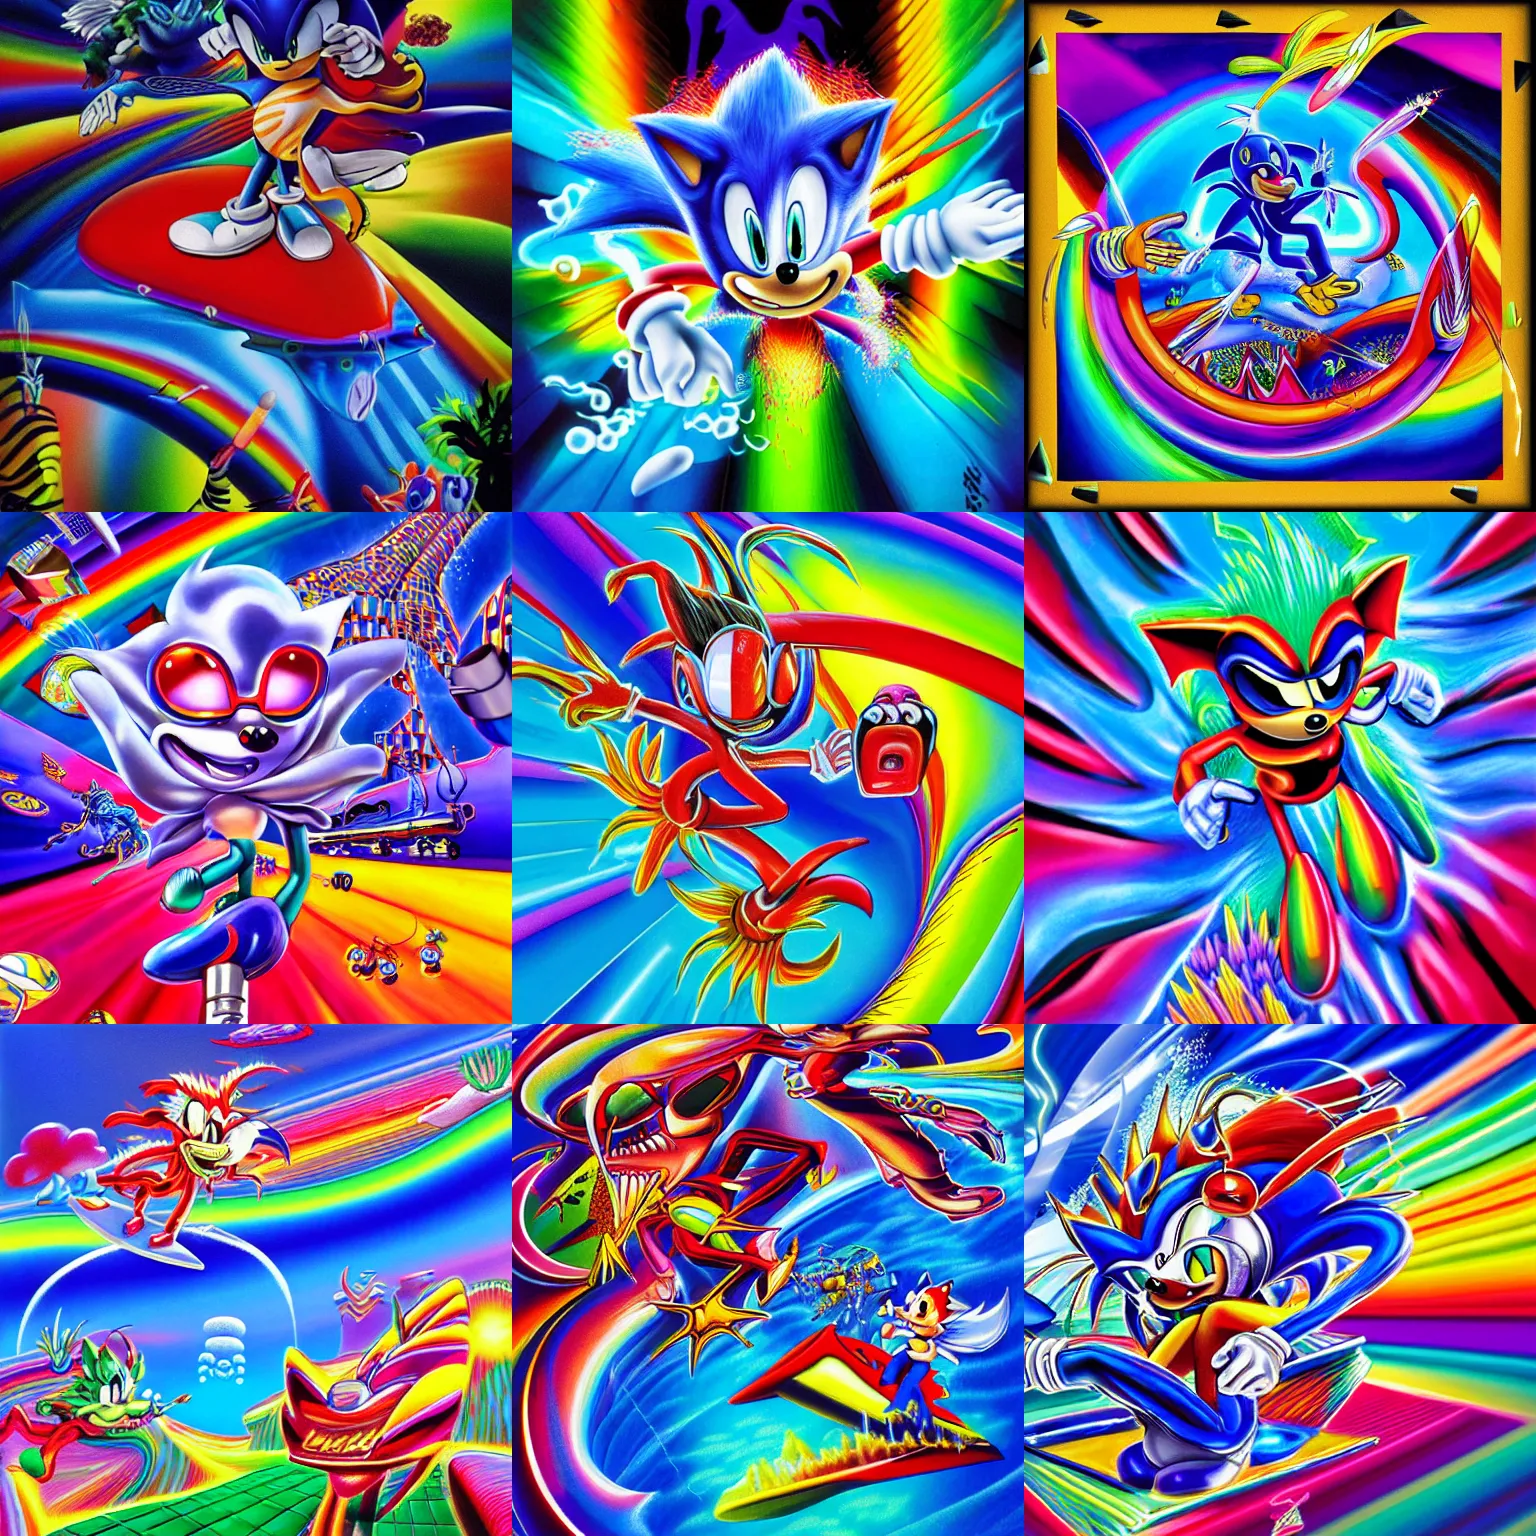 Prompt: surreal, sharp, detailed professional, high quality airbrush art mgmt album cover of a liquid dissolving airbrush art lsd dmt sonic the hedgehog surfing through cyberspace, rainbow checkerboard background, 1 9 9 0 s 1 9 9 2 sega genesis airbrush art video game album cover